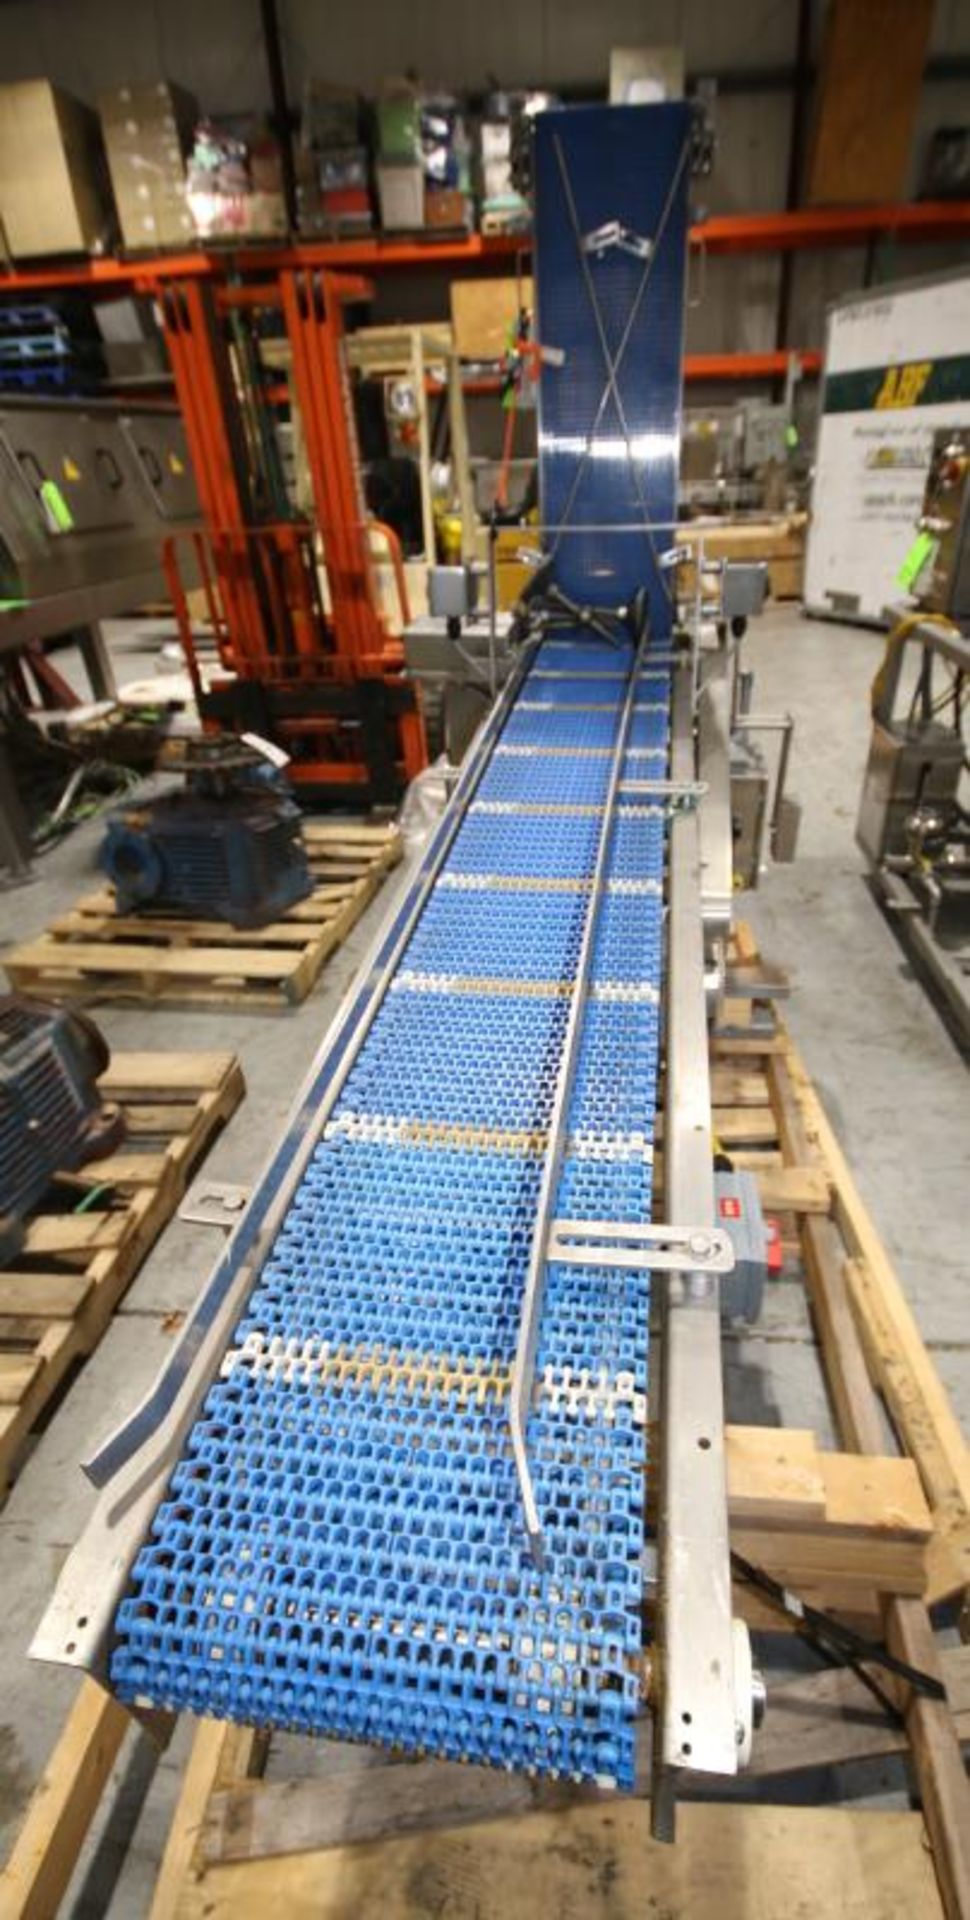 Line Source 7 ft L x 12" W x 25" to 30" H S/S Inclined Conveyor, Model CV8016, SN L02047, with - Image 3 of 5